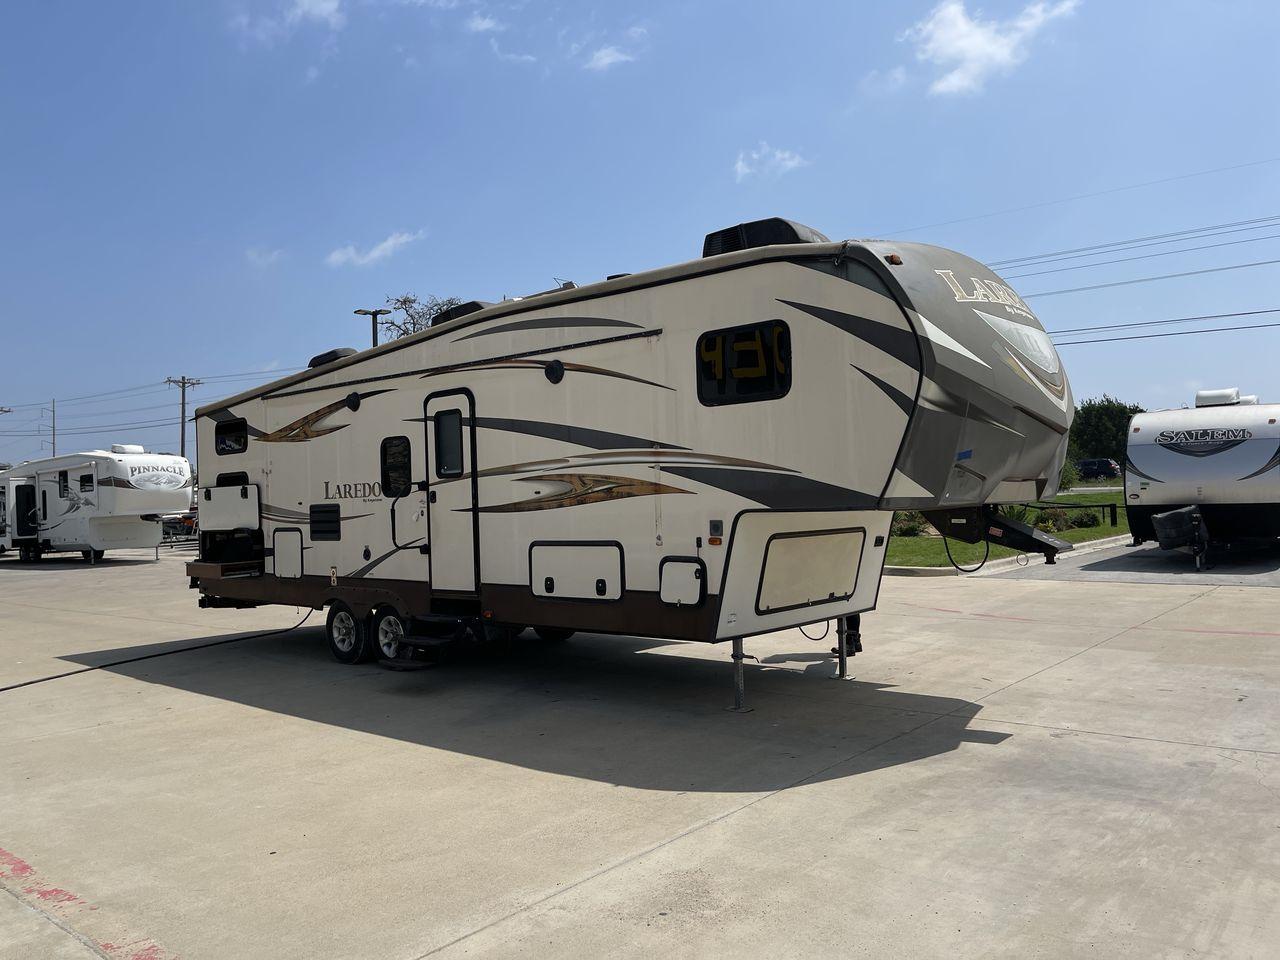 2015 WHITE KEYSTONE LAREDO 285SBH (4YDF28522FK) , Length: 33 ft. | Dry Weight: 7,880 lbs. | Gross Weight: 9,580 lbs. | Slides: 1 transmission, located at 4319 N Main Street, Cleburne, TX, 76033, (817) 221-0660, 32.435829, -97.384178 - This 2015 Keystone Fifth Wheel measures 33 feet long and 8 feet wide with a dry weight of 7,880 lbs. It has a GVWR of 9,580 lbs and a hitch weight of 1,465 lbs. This model also comes with automatic heating and cooling rated at 30,000 and 13,500 BTUs respectively. The exterior of this unit is a base - Photo #24